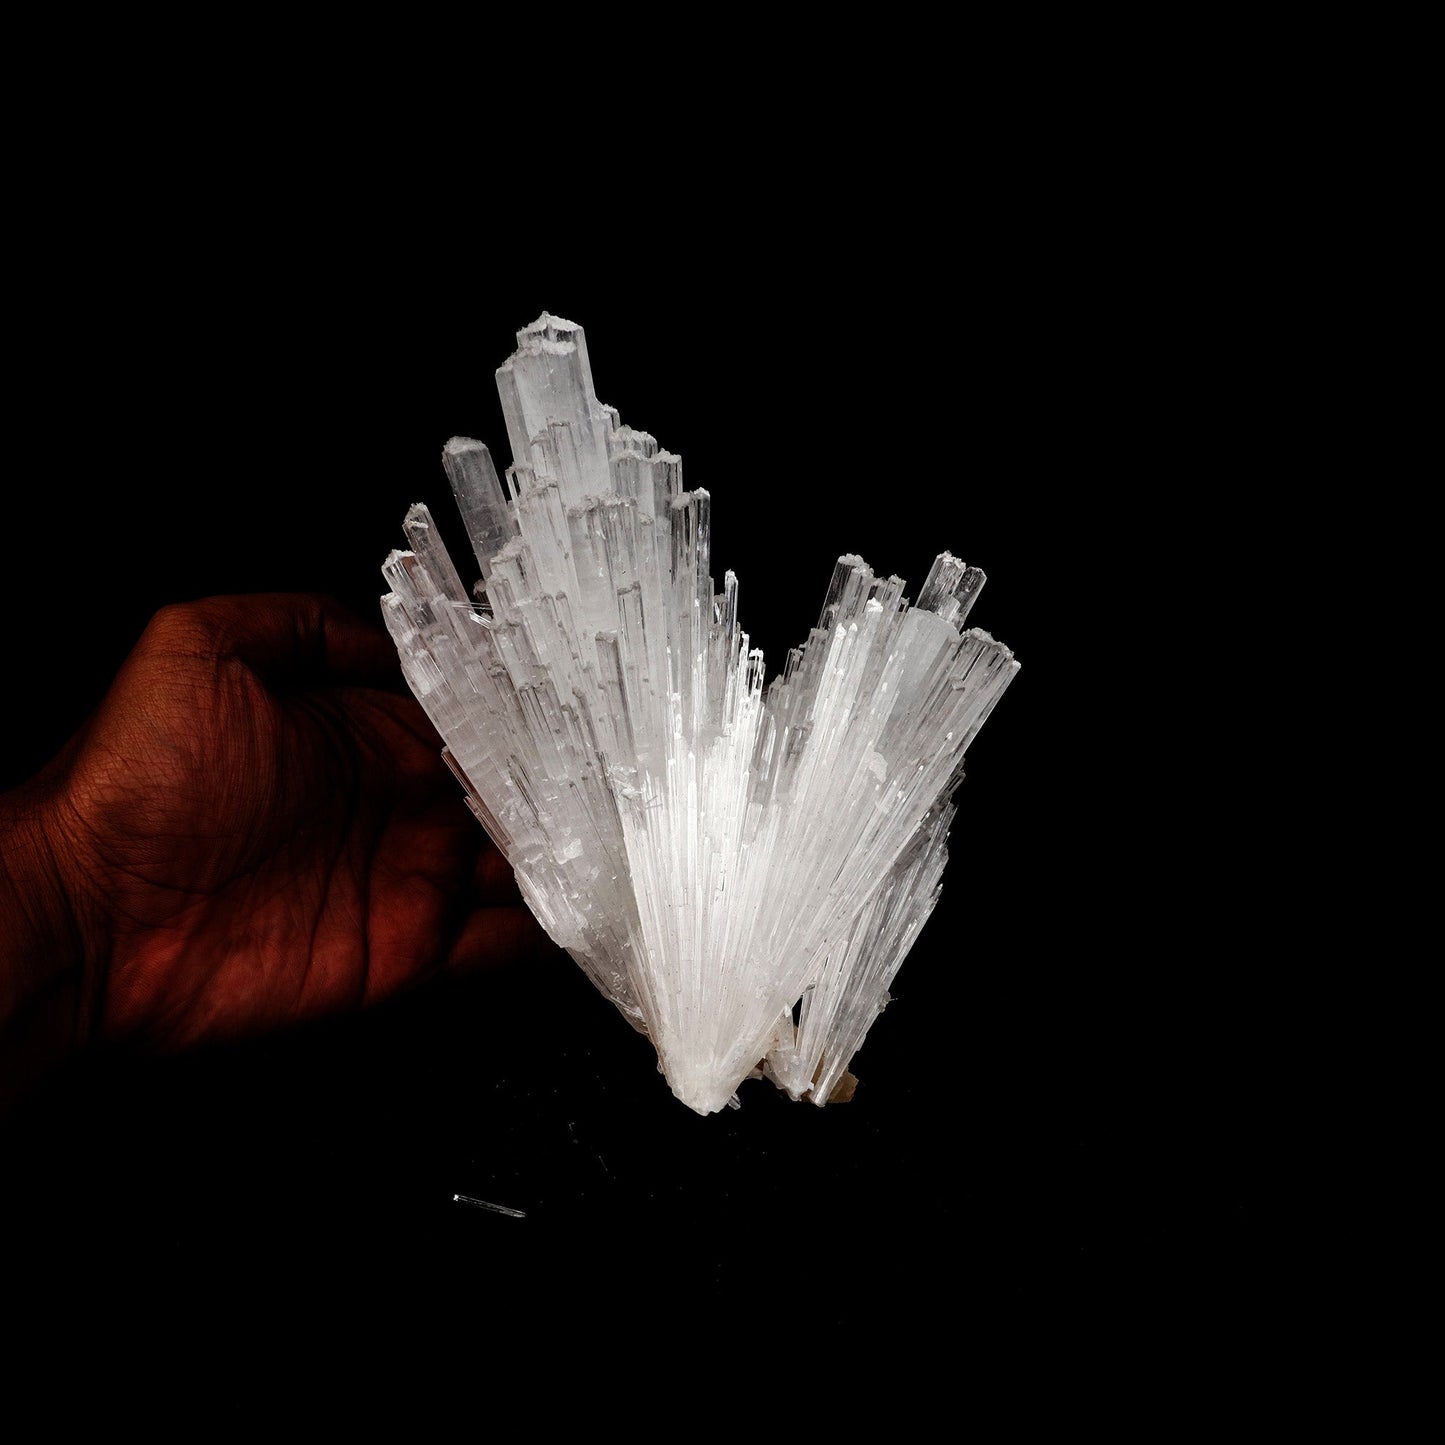 Scolecite Sprays Natural Mineral Specimen # B 5227  https://www.superbminerals.us/products/scolecite-sprays-natural-mineral-specimen-b-5227  Features: A huge, tapering spray of colourless elongated Scolecite crystals. A little fragment of matrix is linked to a small Stilbite crystal. Scolecite crystals have a glassy appearance and are highly translucent, with transparent terminations. A lovely specimen in superb condition. Primary Mineral(s): Scolecite